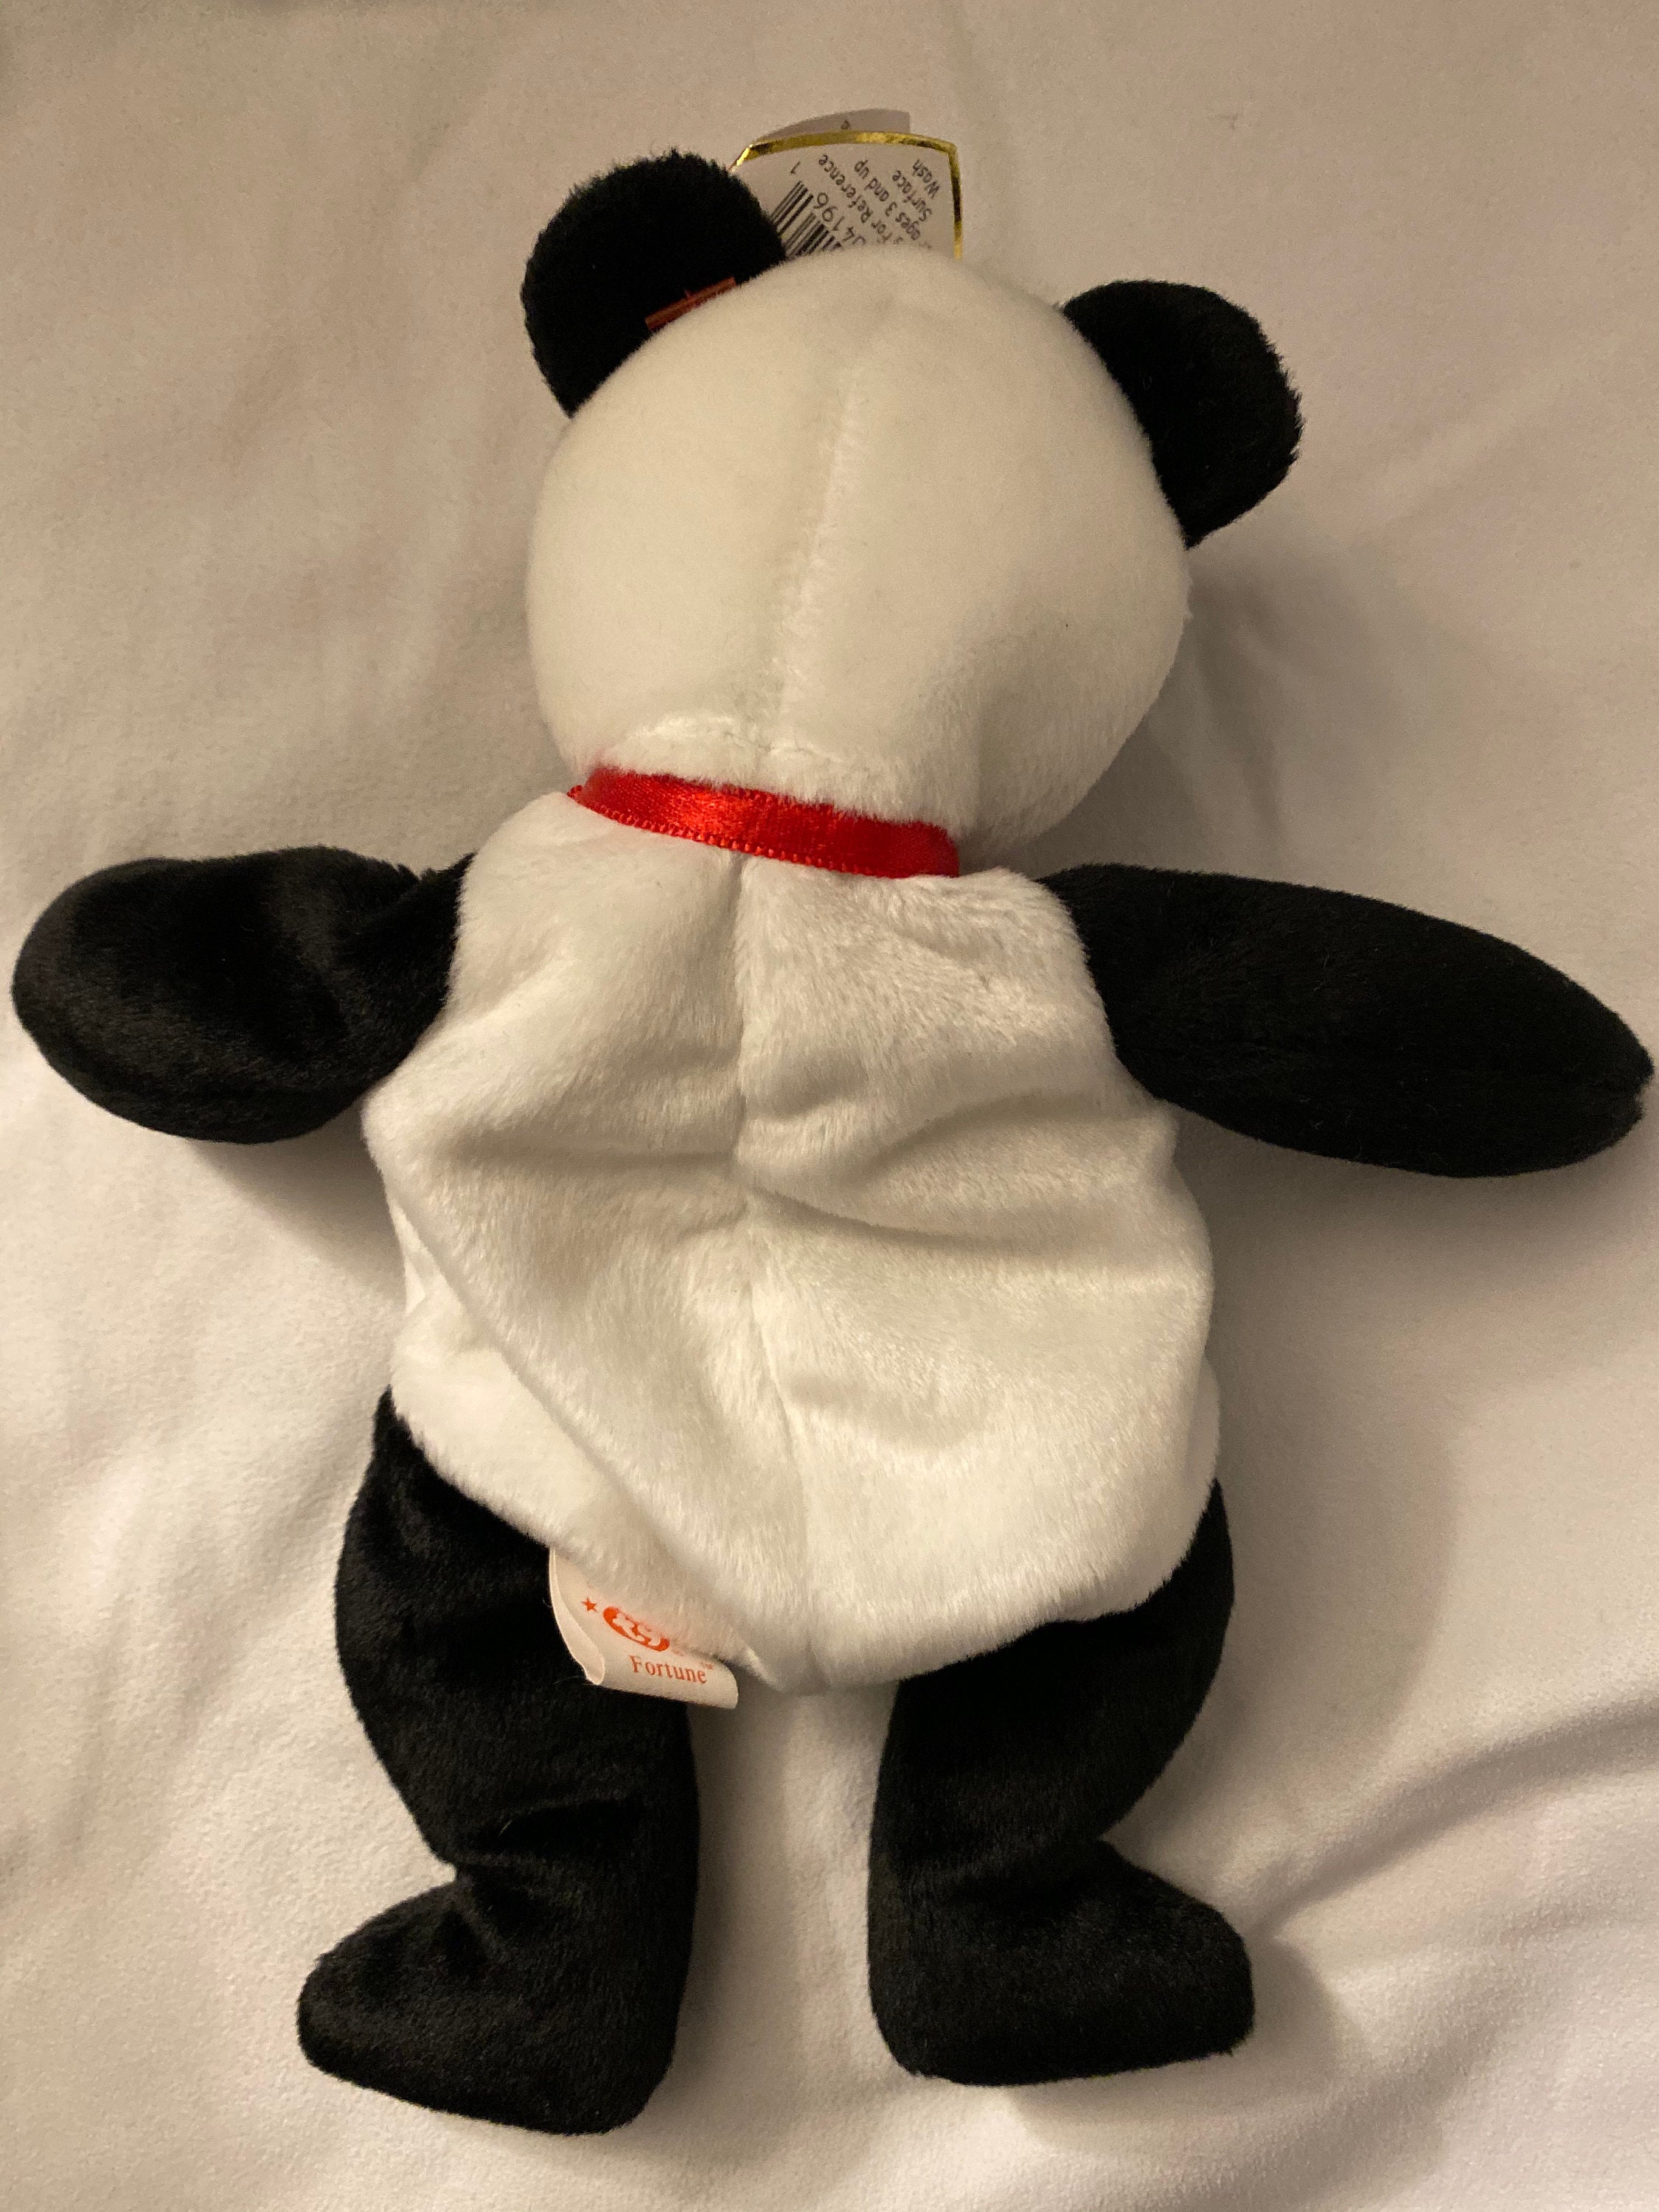 Details about   Ty Fortune Beanie Babies 1998 RARE With Tag Errors 